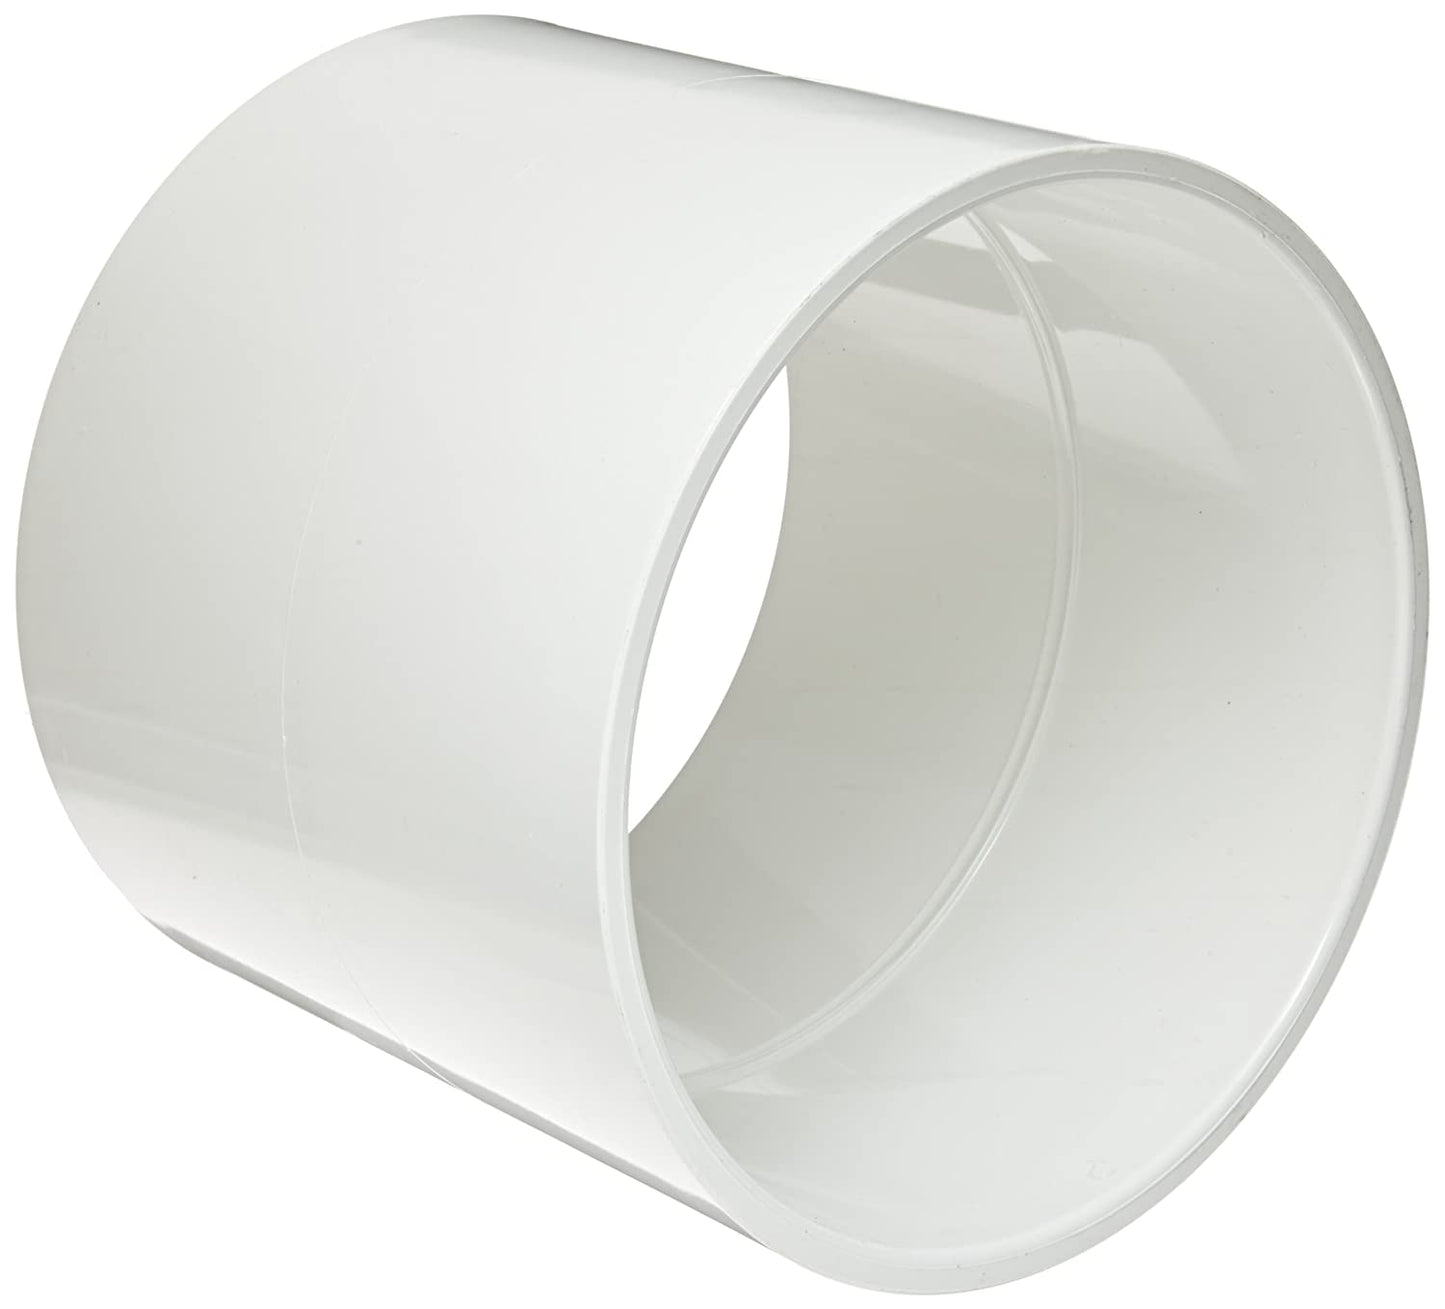 429-040 - 4" PVC Pipe Fitting, Coupling, Schedule 40, White,Socket